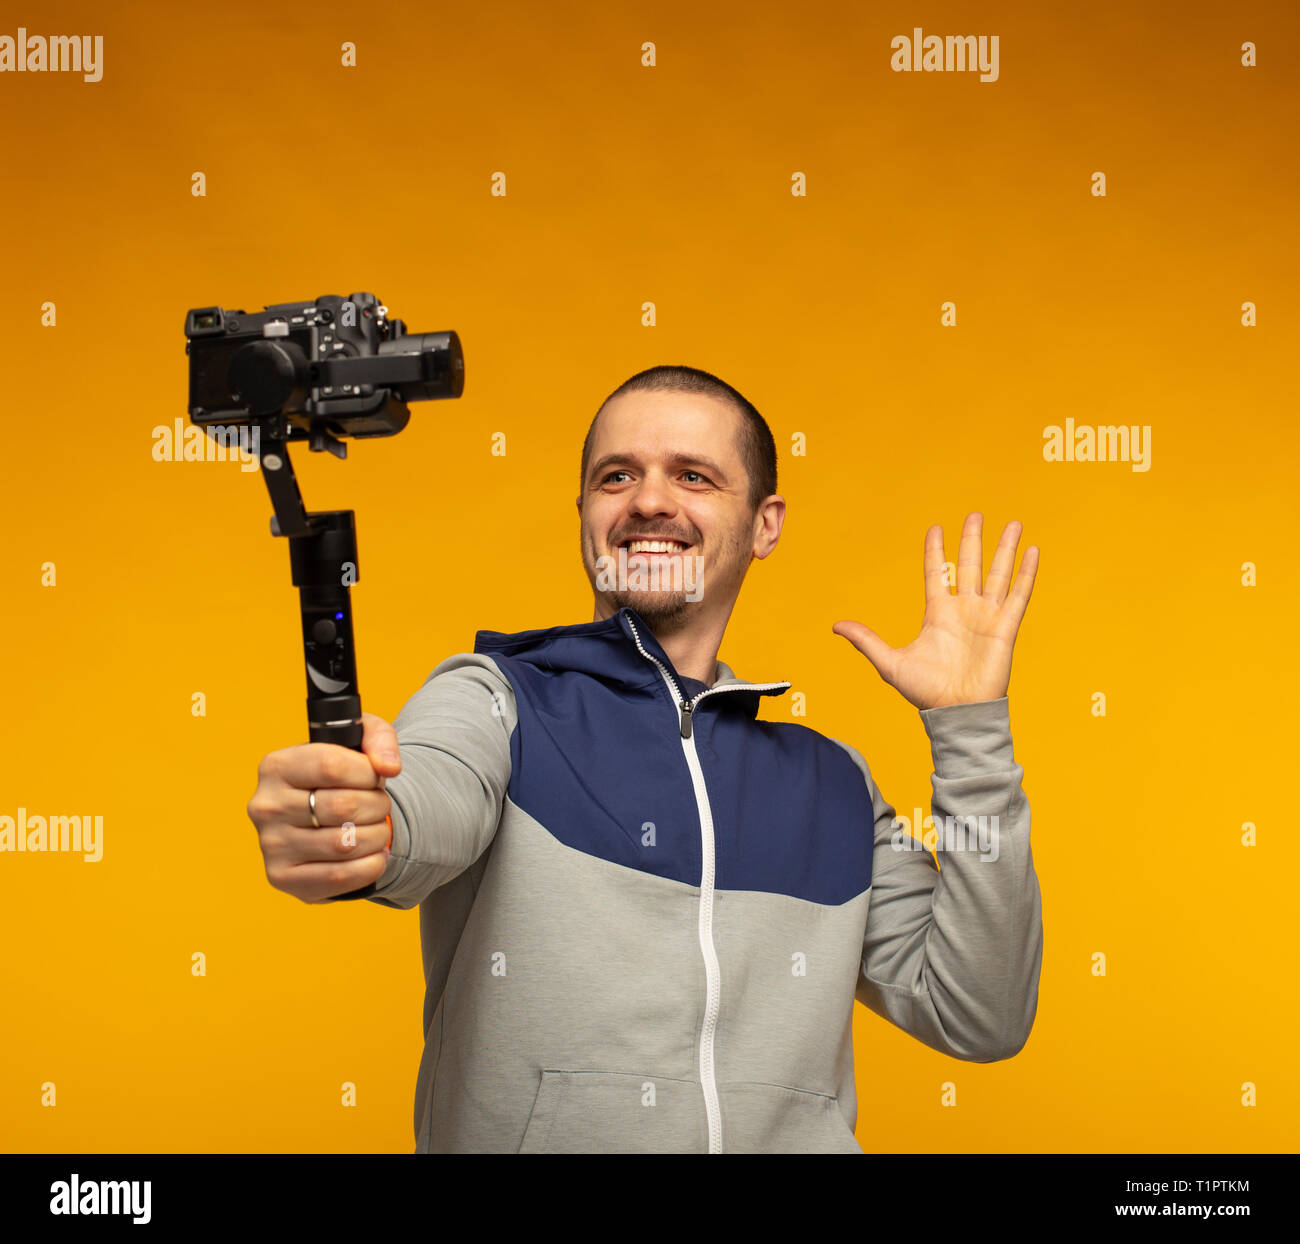 Man vlogger or blogger or videographer filming hisself on camera Stock Photo